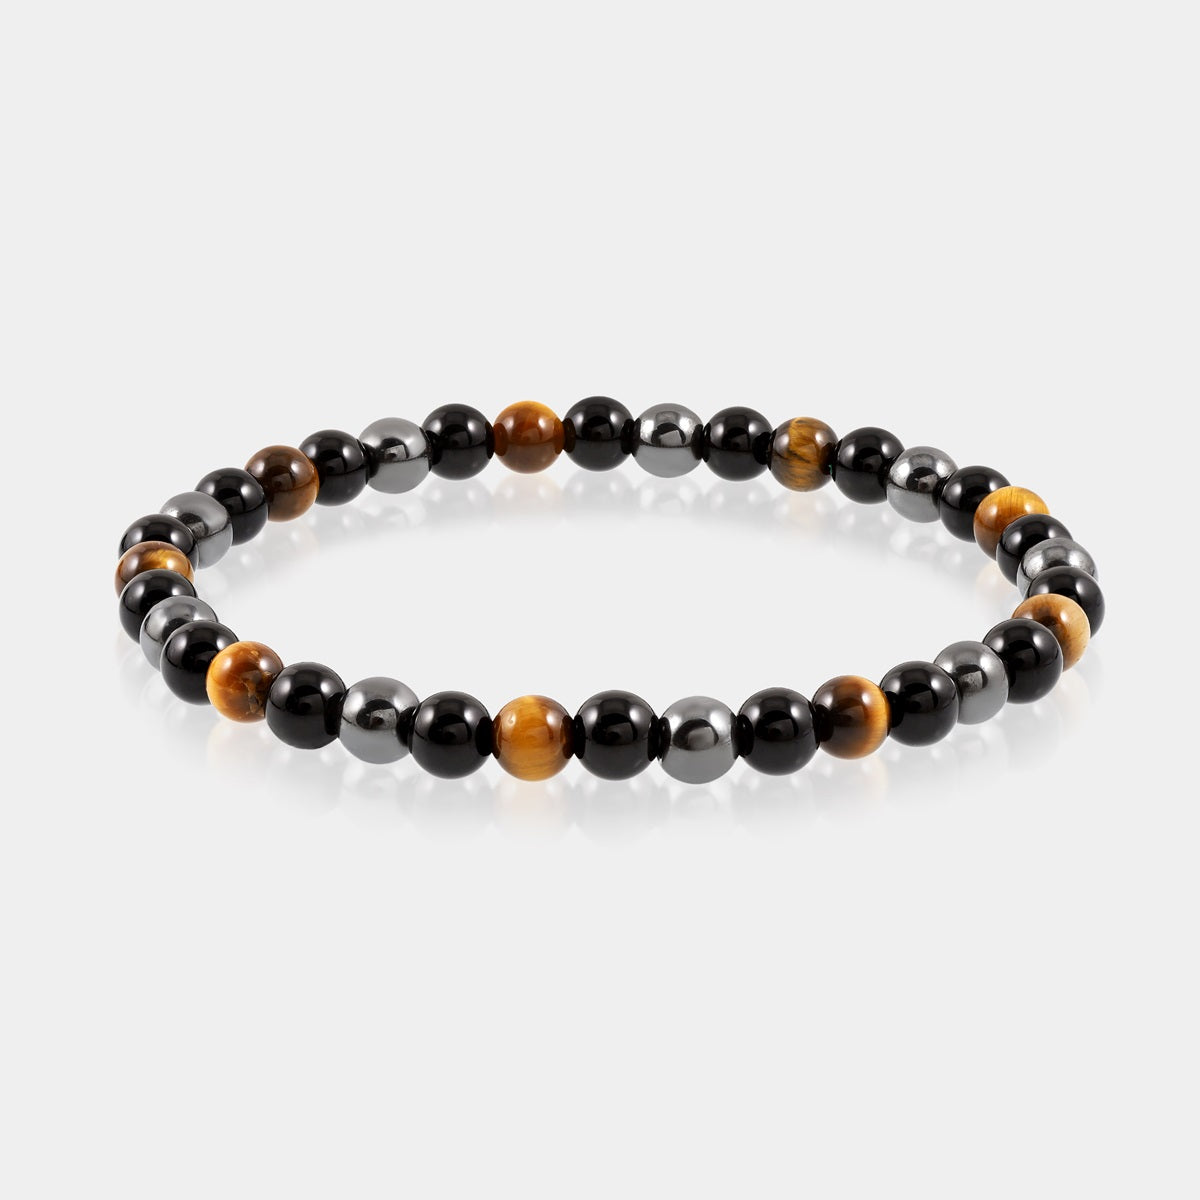 Detailed view of a 6mm and 8mm smooth round Golden Tiger's Eye bead, symbolizing confidence and courage in the Triple Protection Bracelet